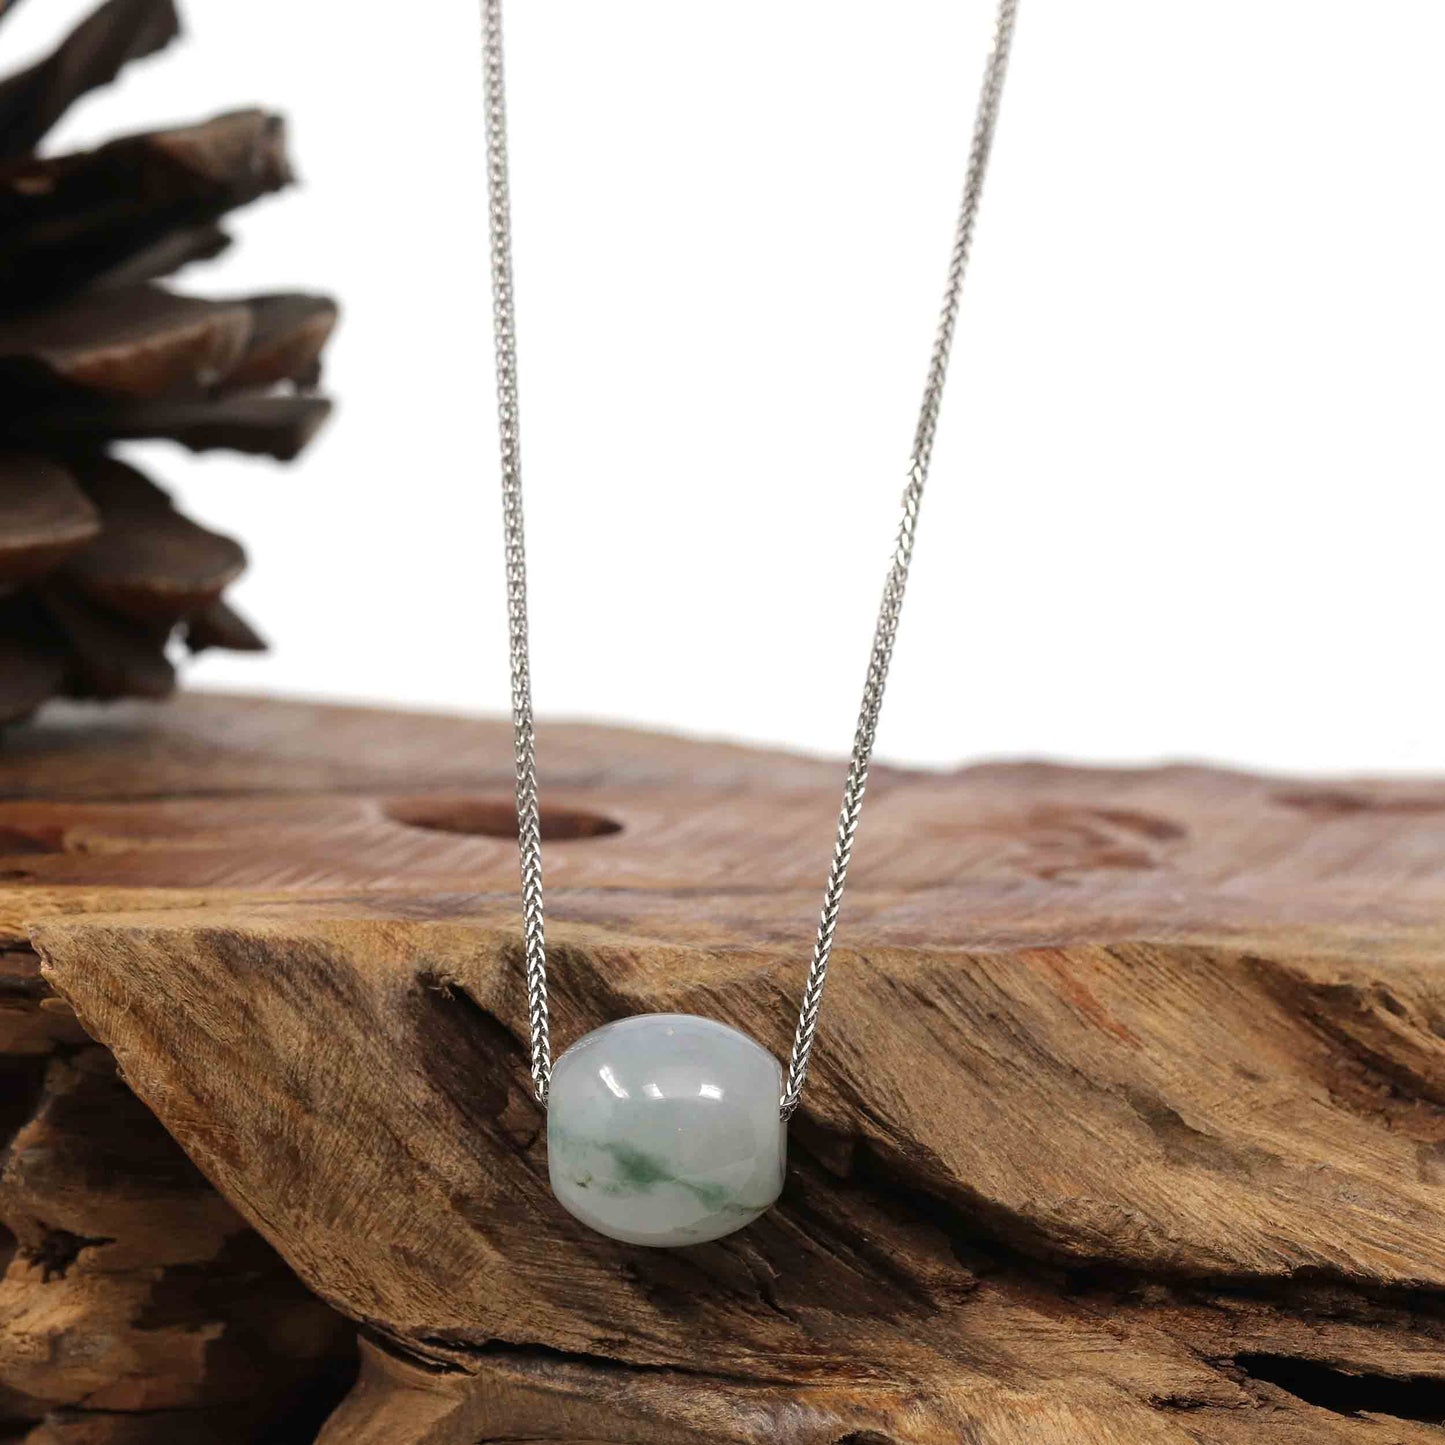  Jade Pendant Necklace Copy of  "Good Luck Button" Necklace Real Ice Blue Green Jade Lucky TongTong Pendant Necklace